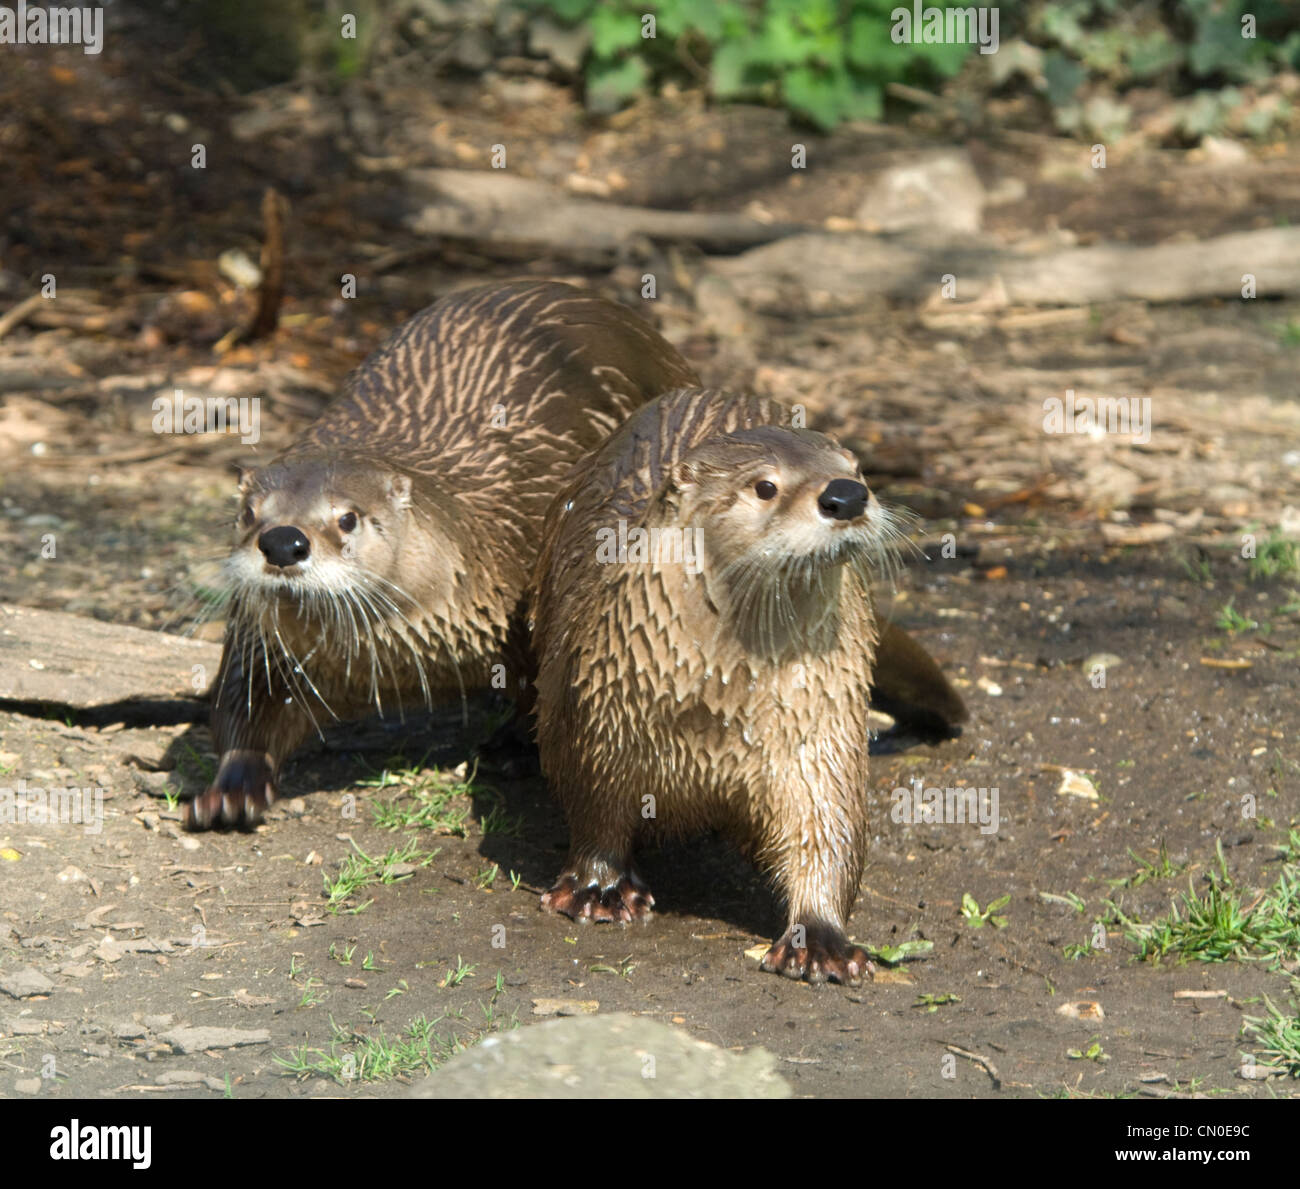 North American River Otter (Lontra canadensis) Stock Photo